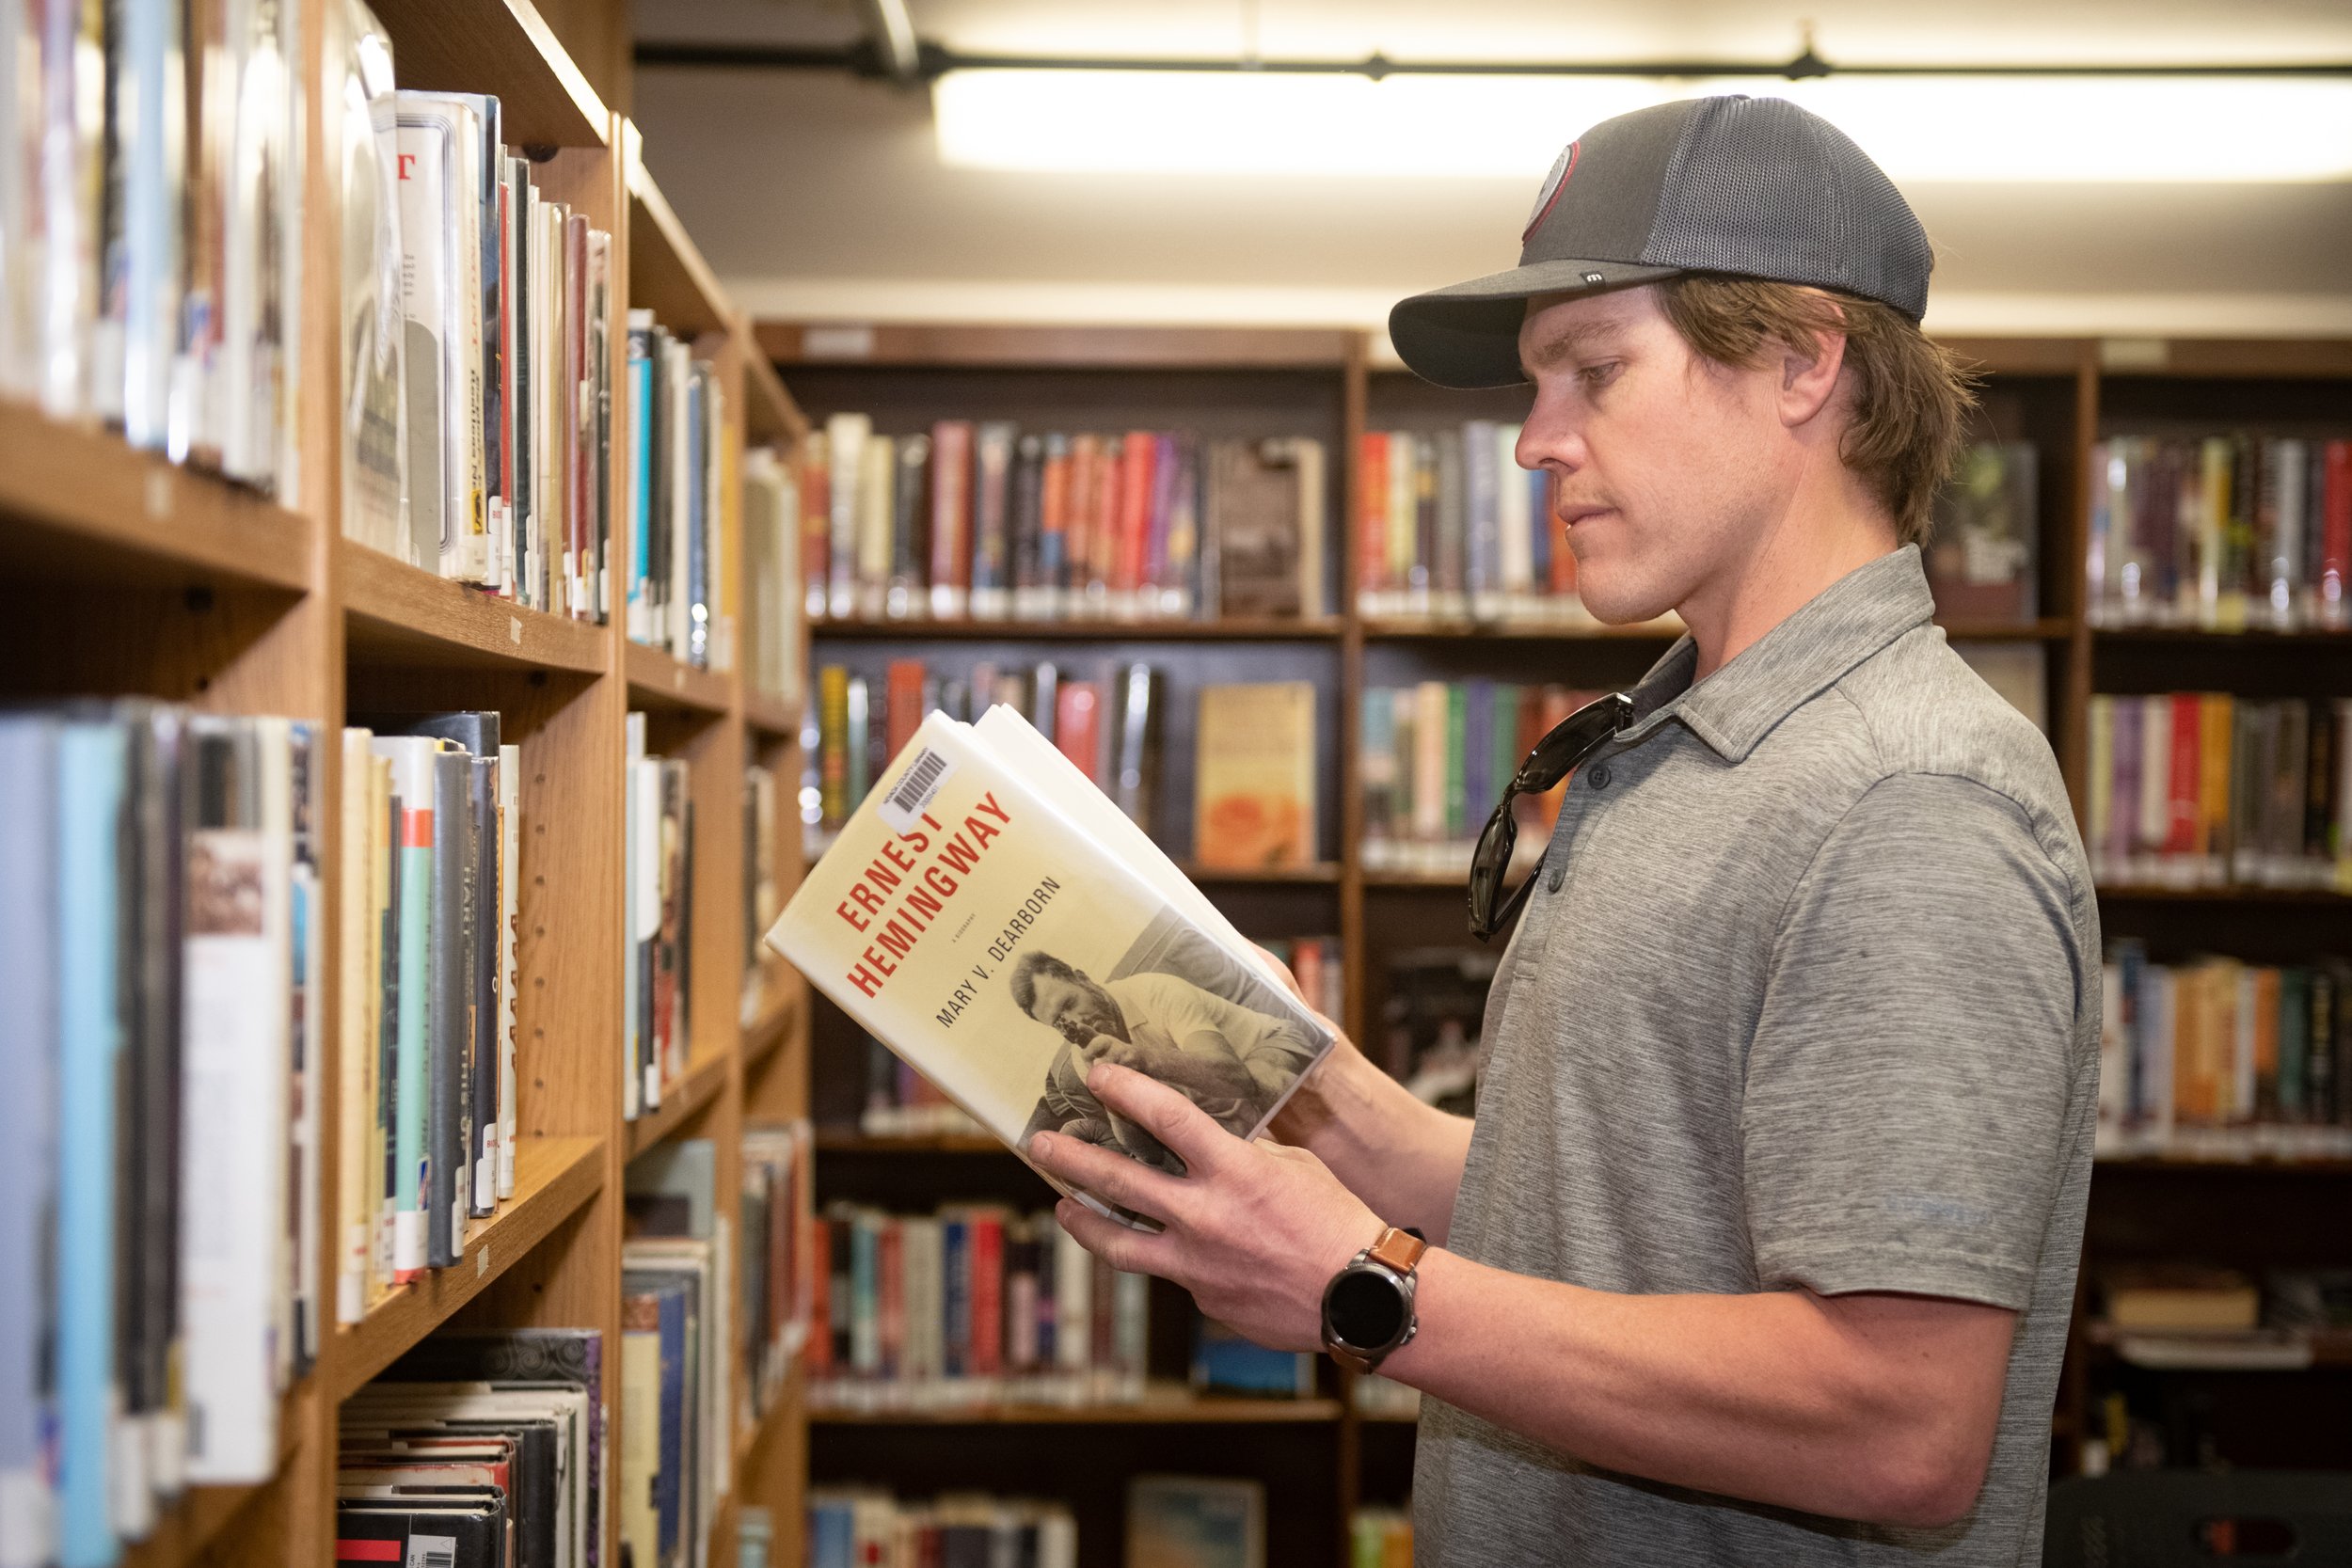 man with baseball hat reading book standing